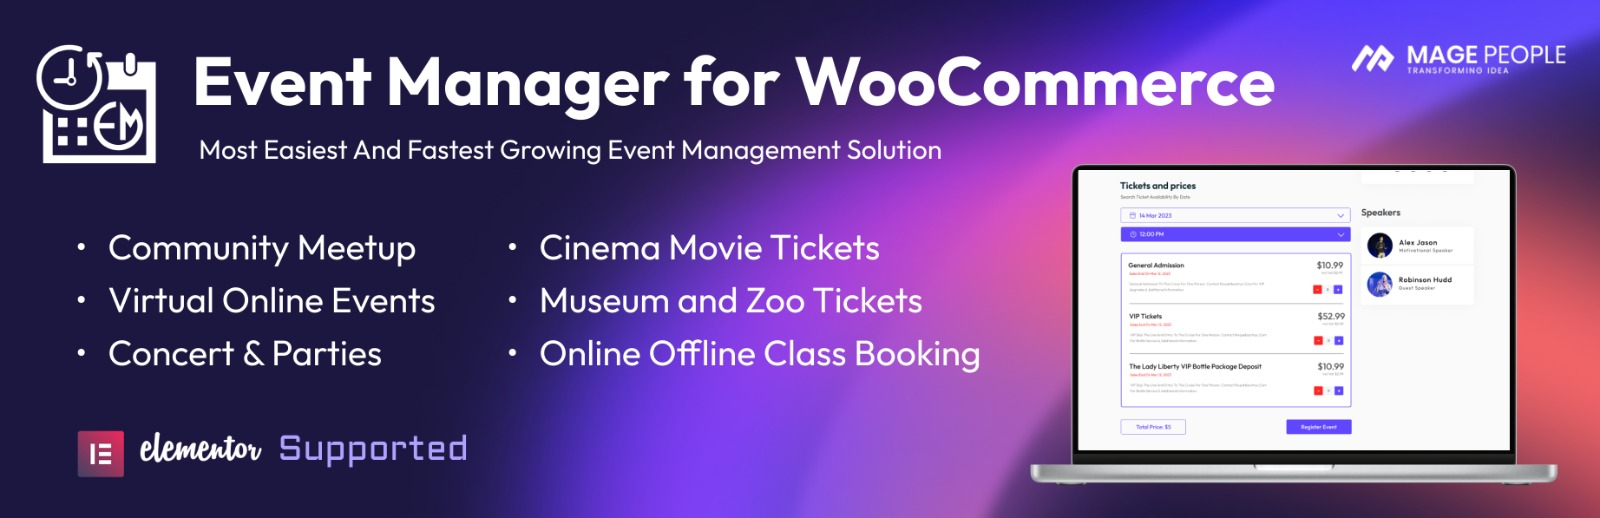 Product image for Event Manager and Tickets Selling Plugin for WooCommerce.